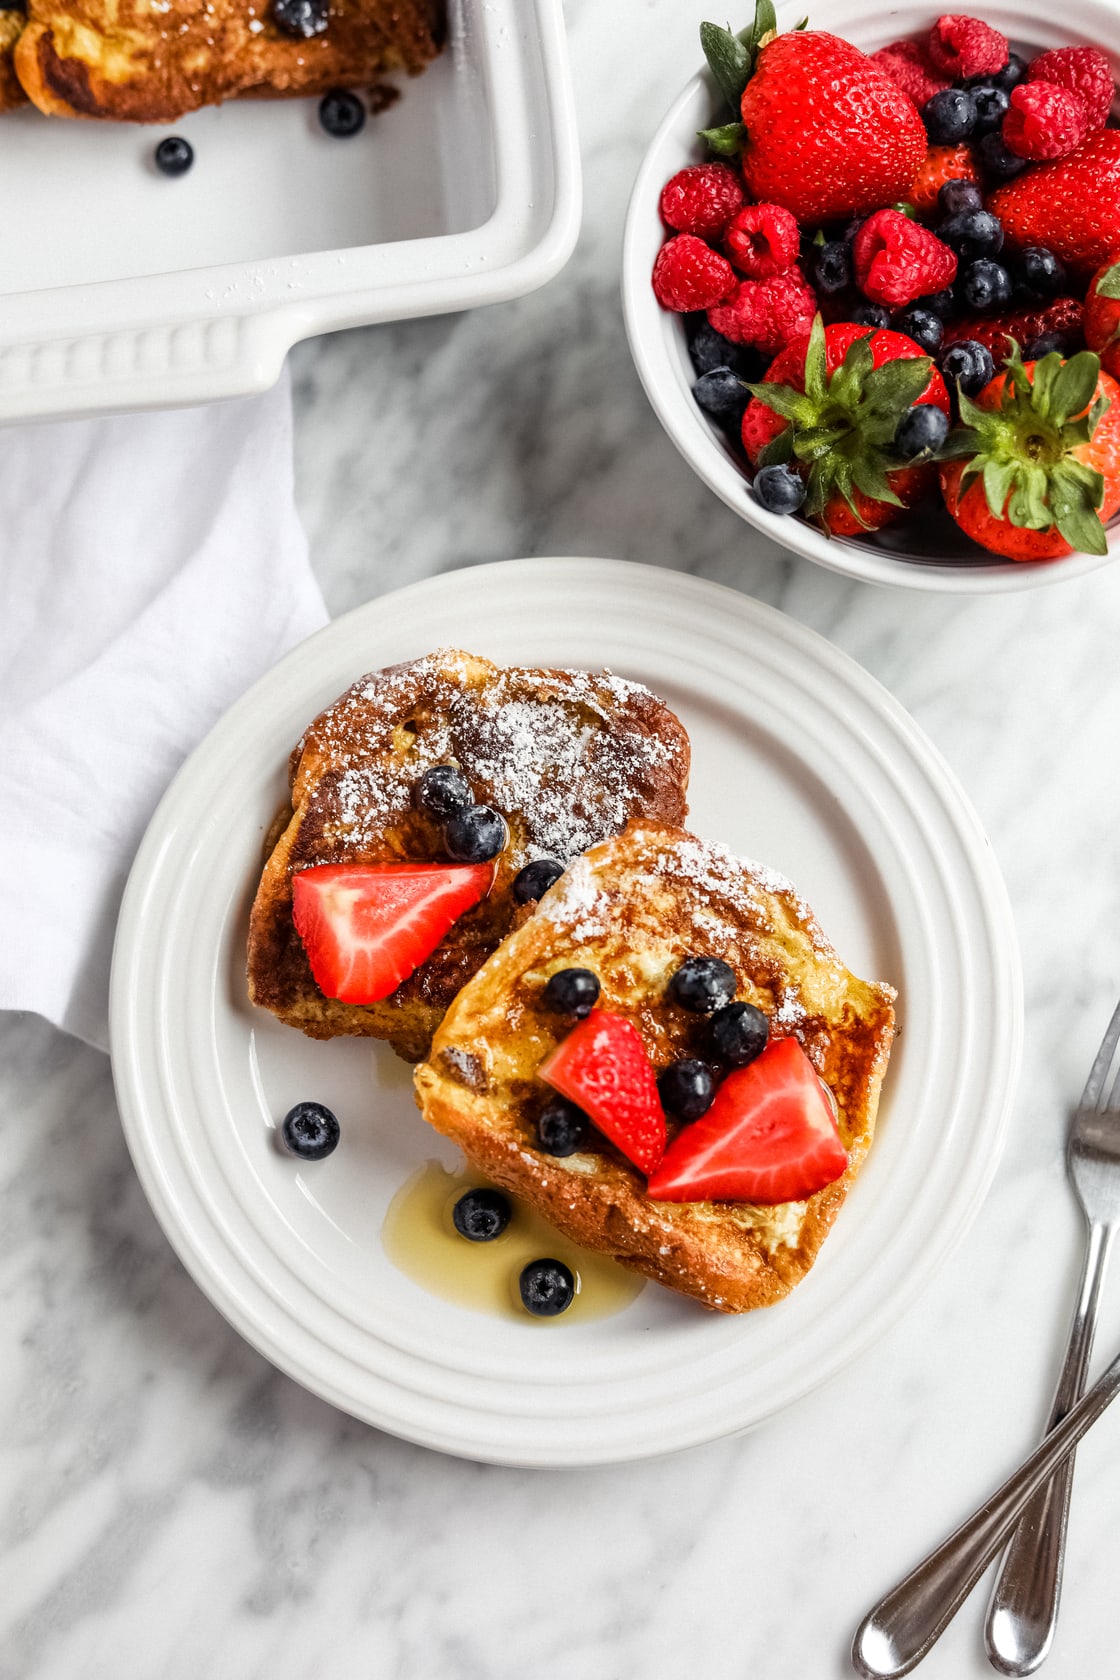 Le Creuset plate of brunch french toast